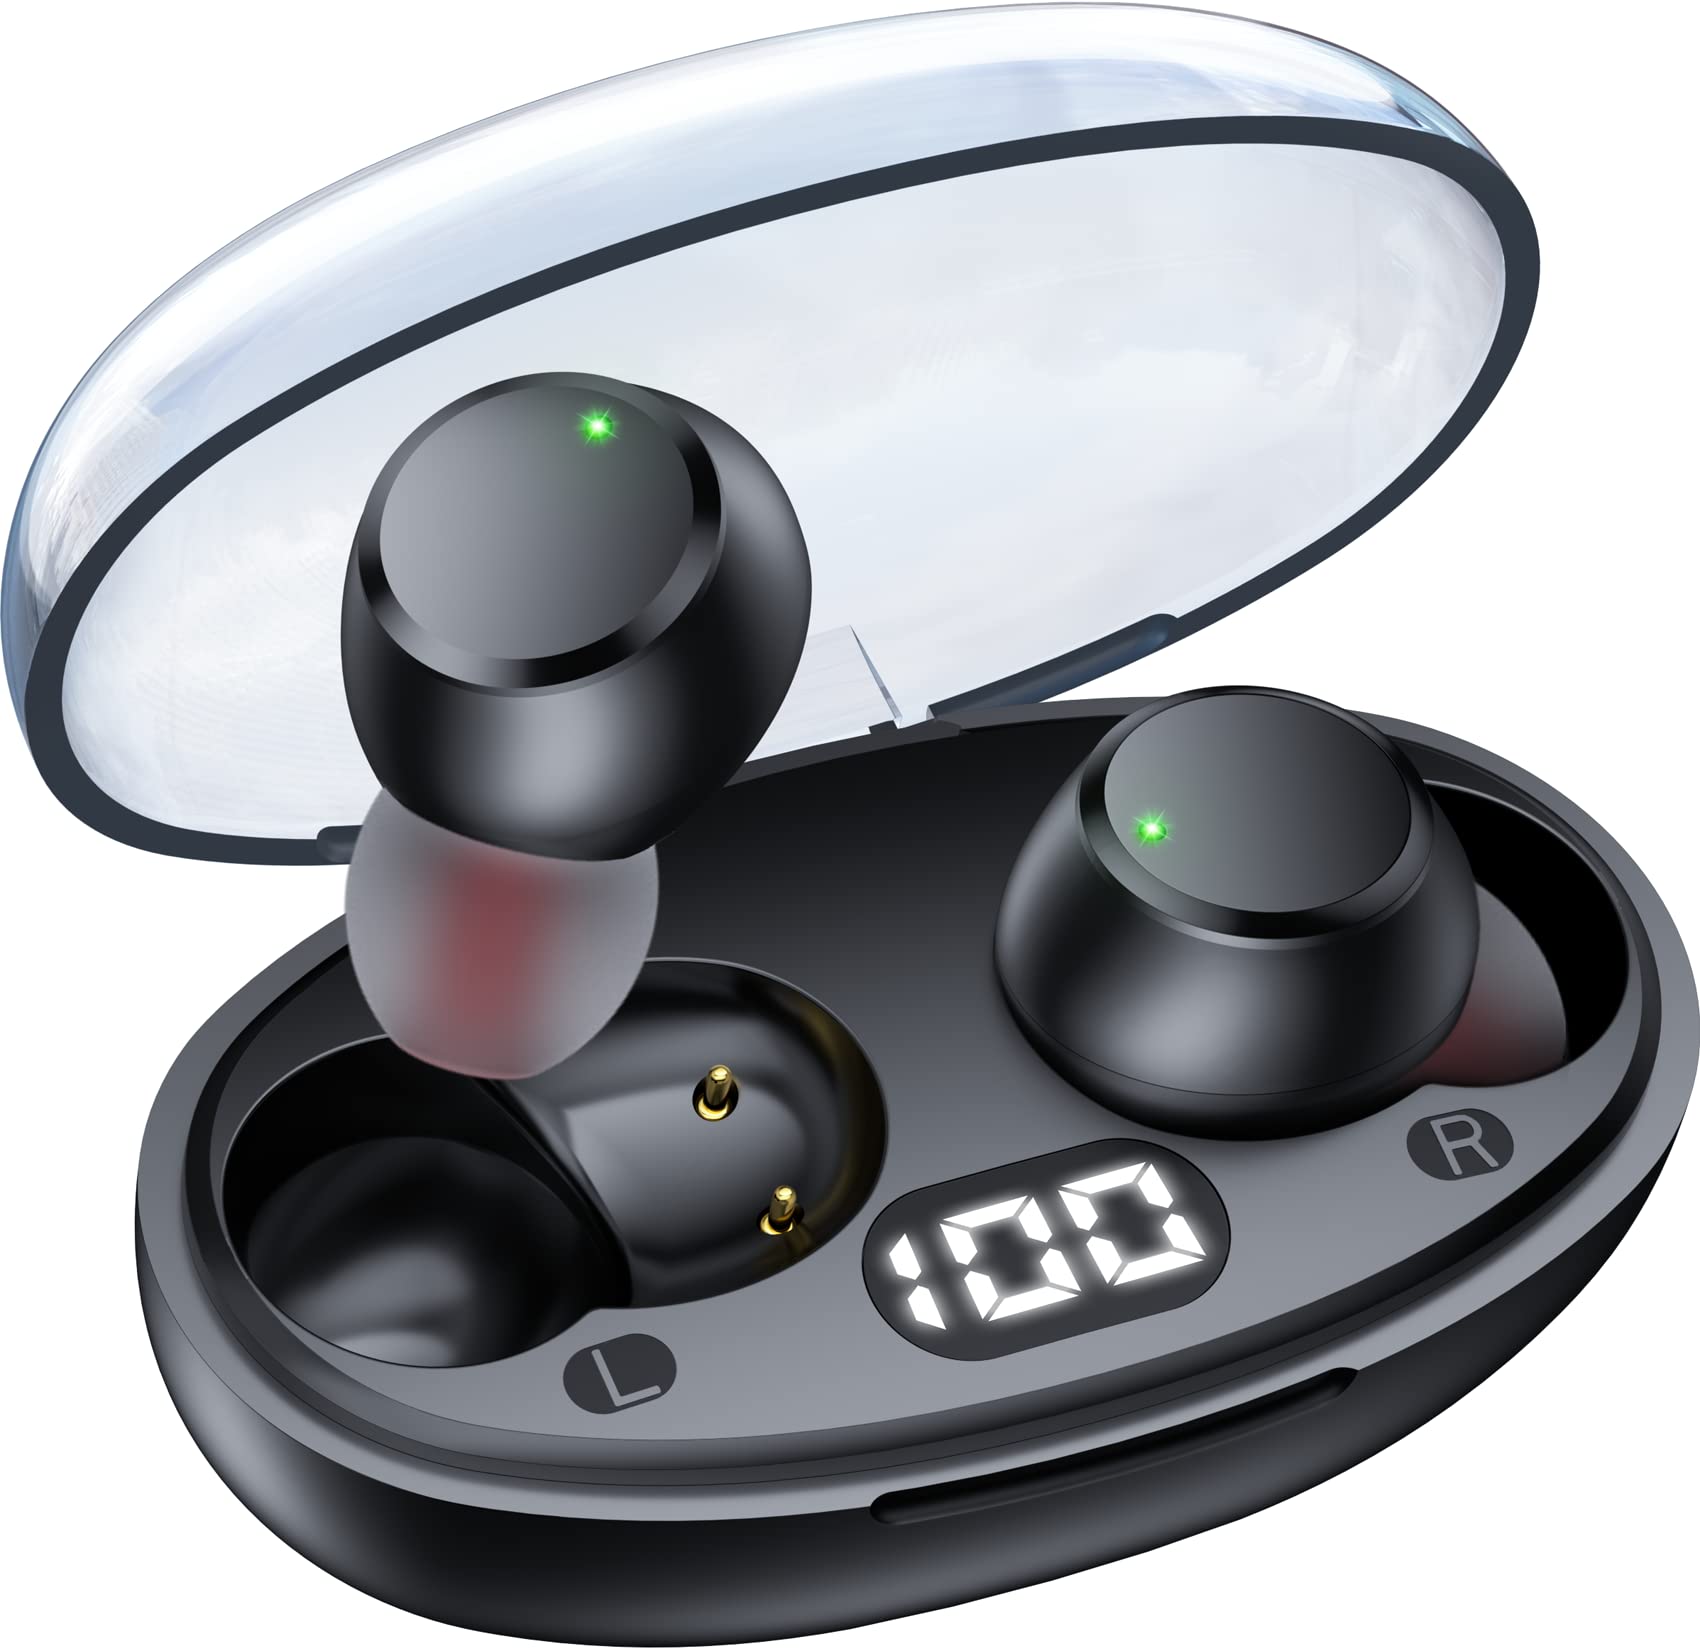 ZINGBIRD T62 Wireless Earbuds for $9.49+FS w/prime or Order over $25